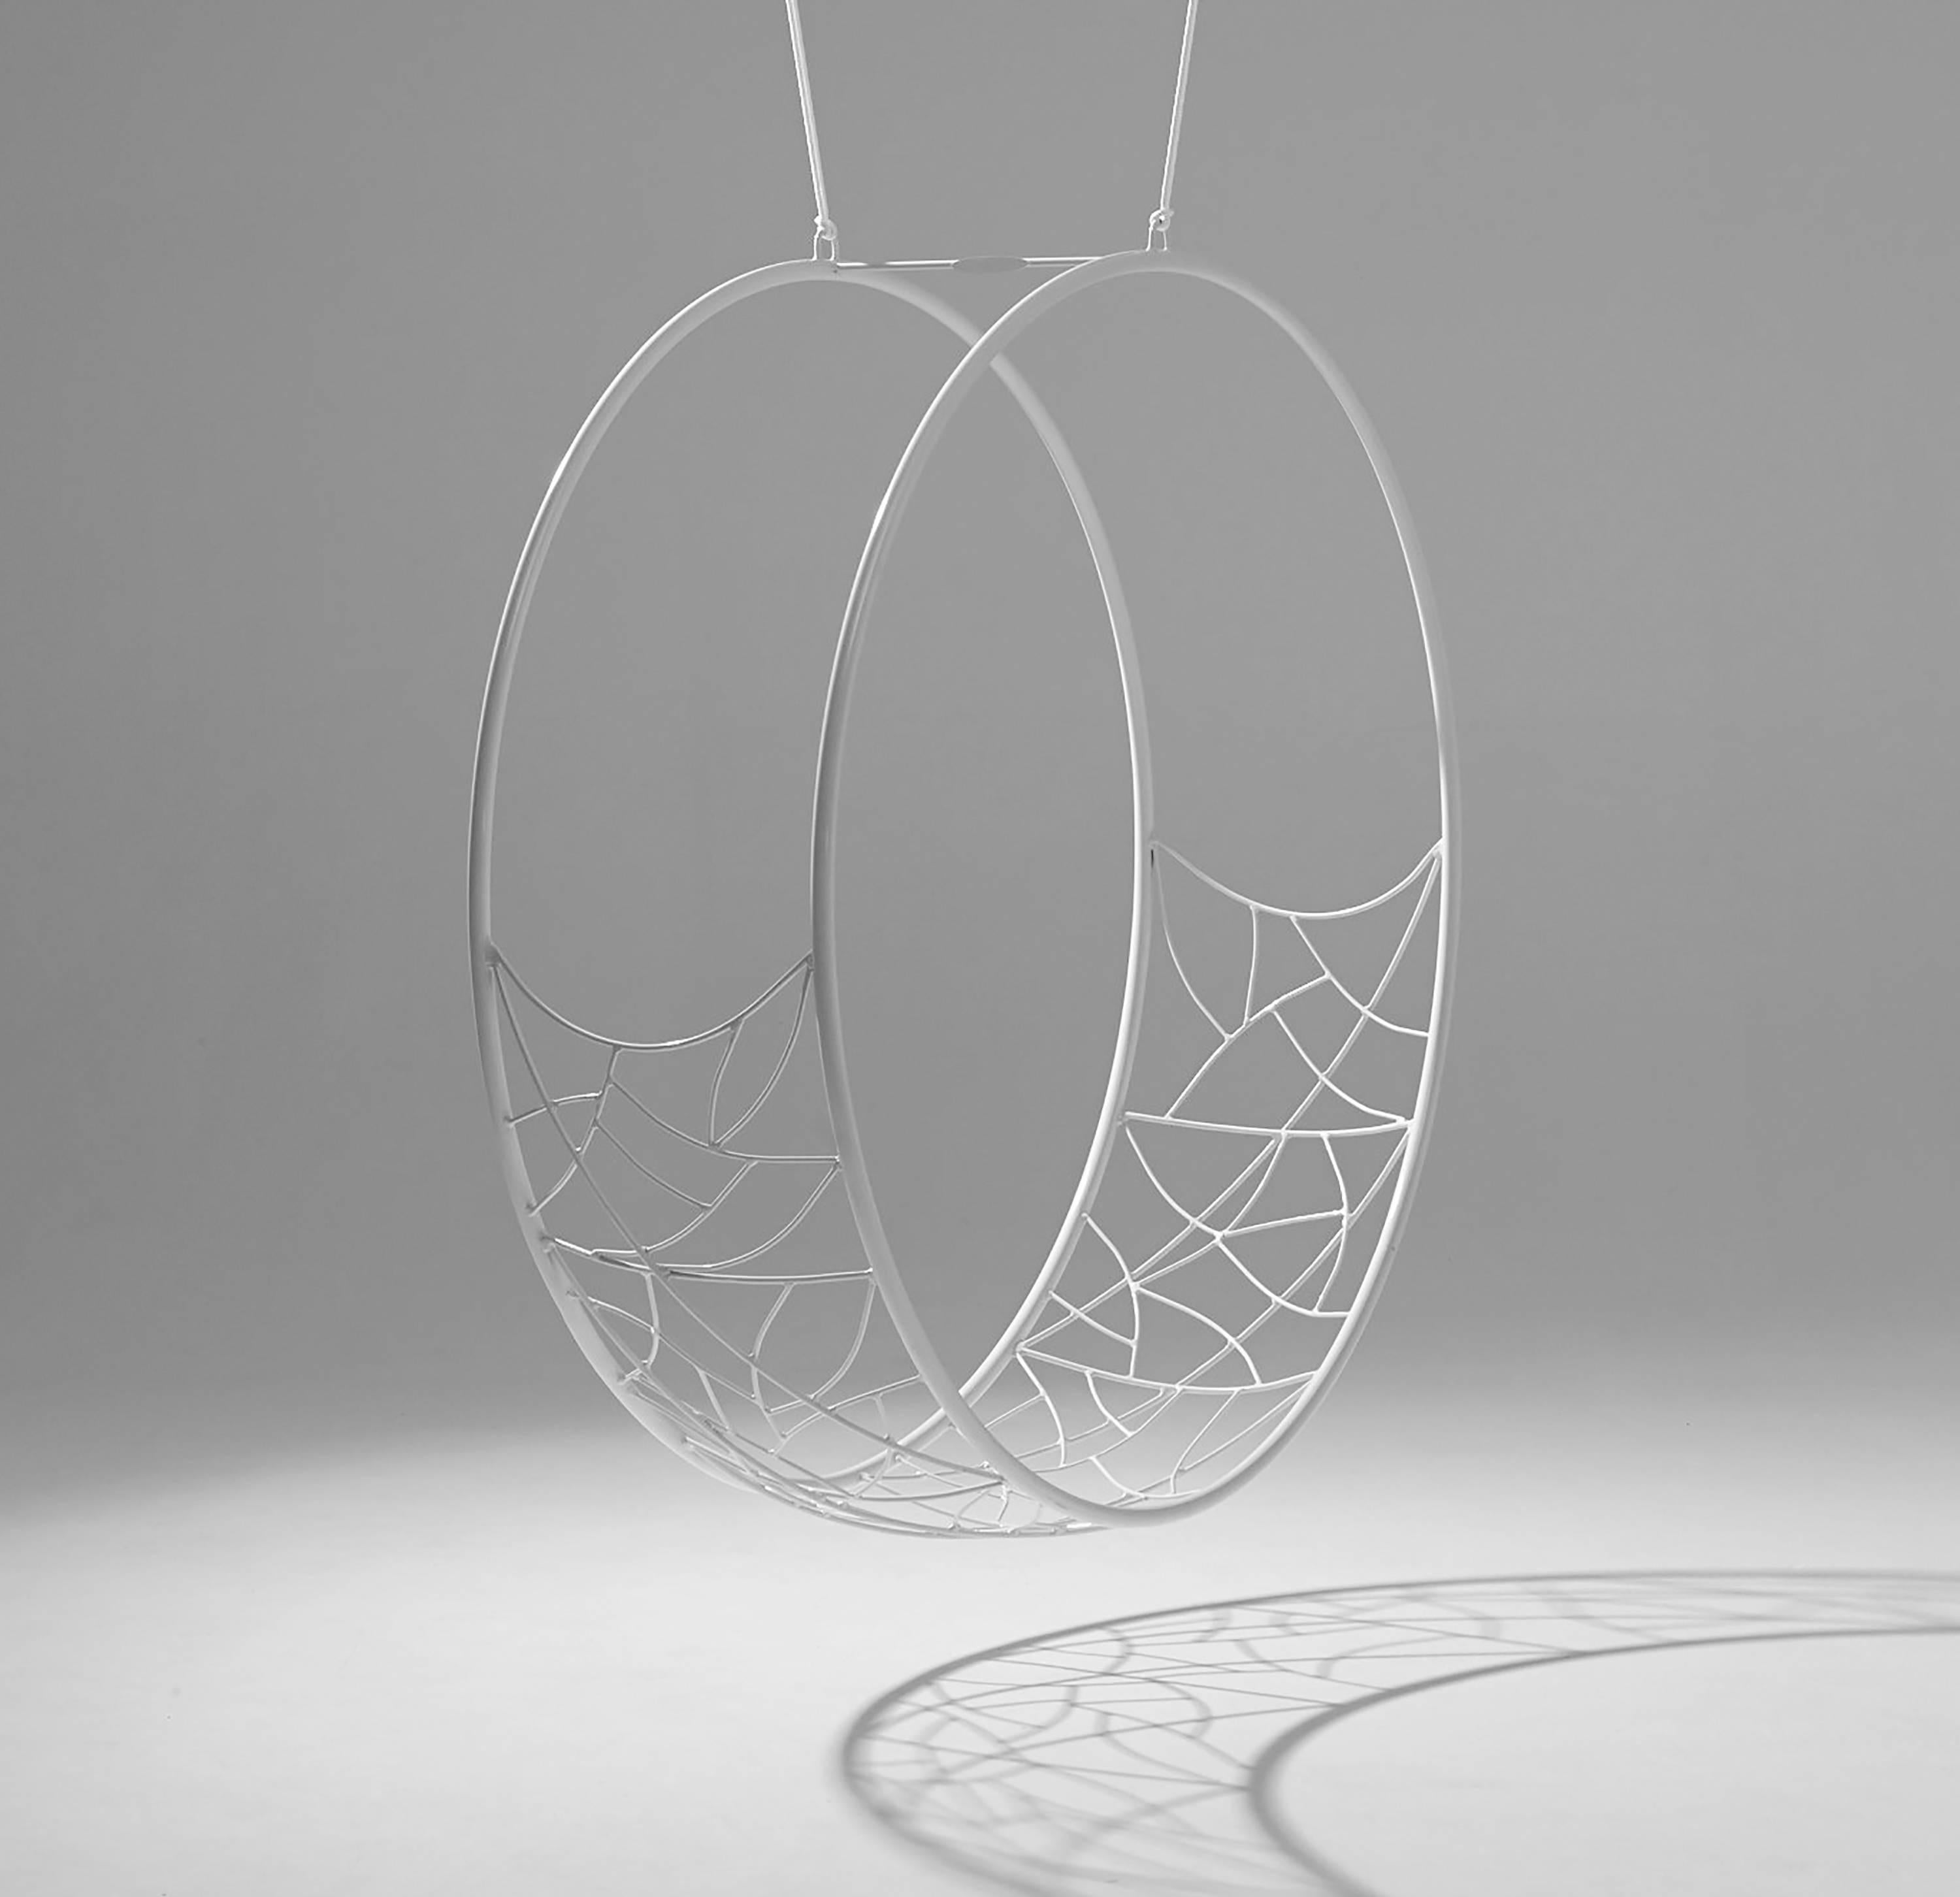 The Wheel hanging swing chair is sculptural and dynamic. Its striking circular shape lends itself for use as a functional art piece.
The pattern detail is inspired by nature and reminiscent of the veins in leaves, tree branches intersecting, the